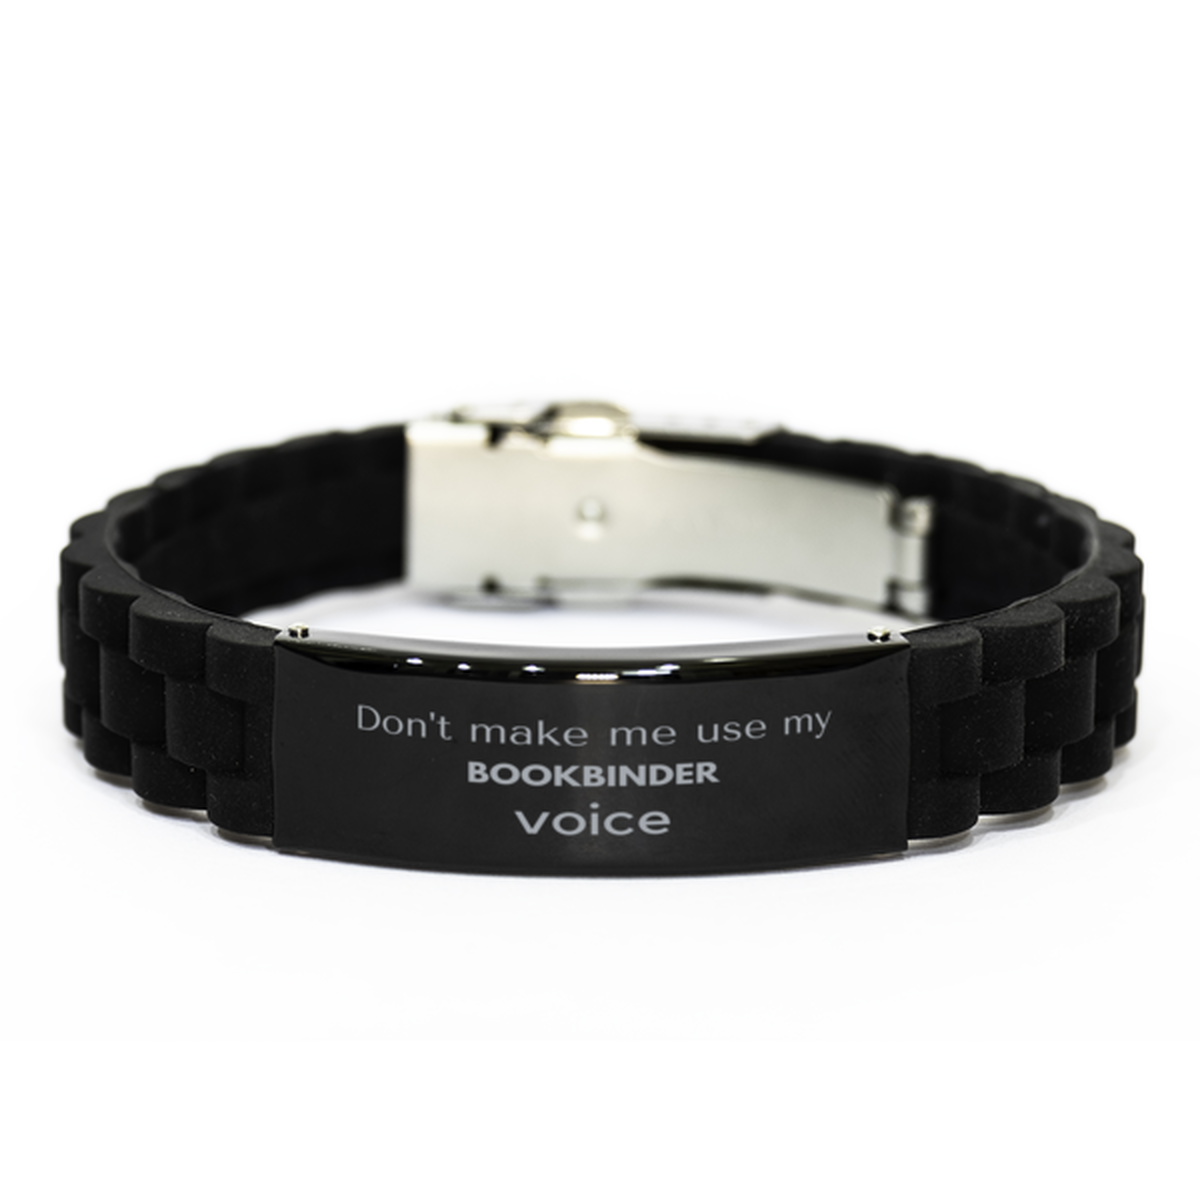 Don't make me use my Bookbinder voice, Sarcasm Bookbinder Gifts, Christmas Bookbinder Black Glidelock Clasp Bracelet Birthday Unique Gifts For Bookbinder Coworkers, Men, Women, Colleague, Friends